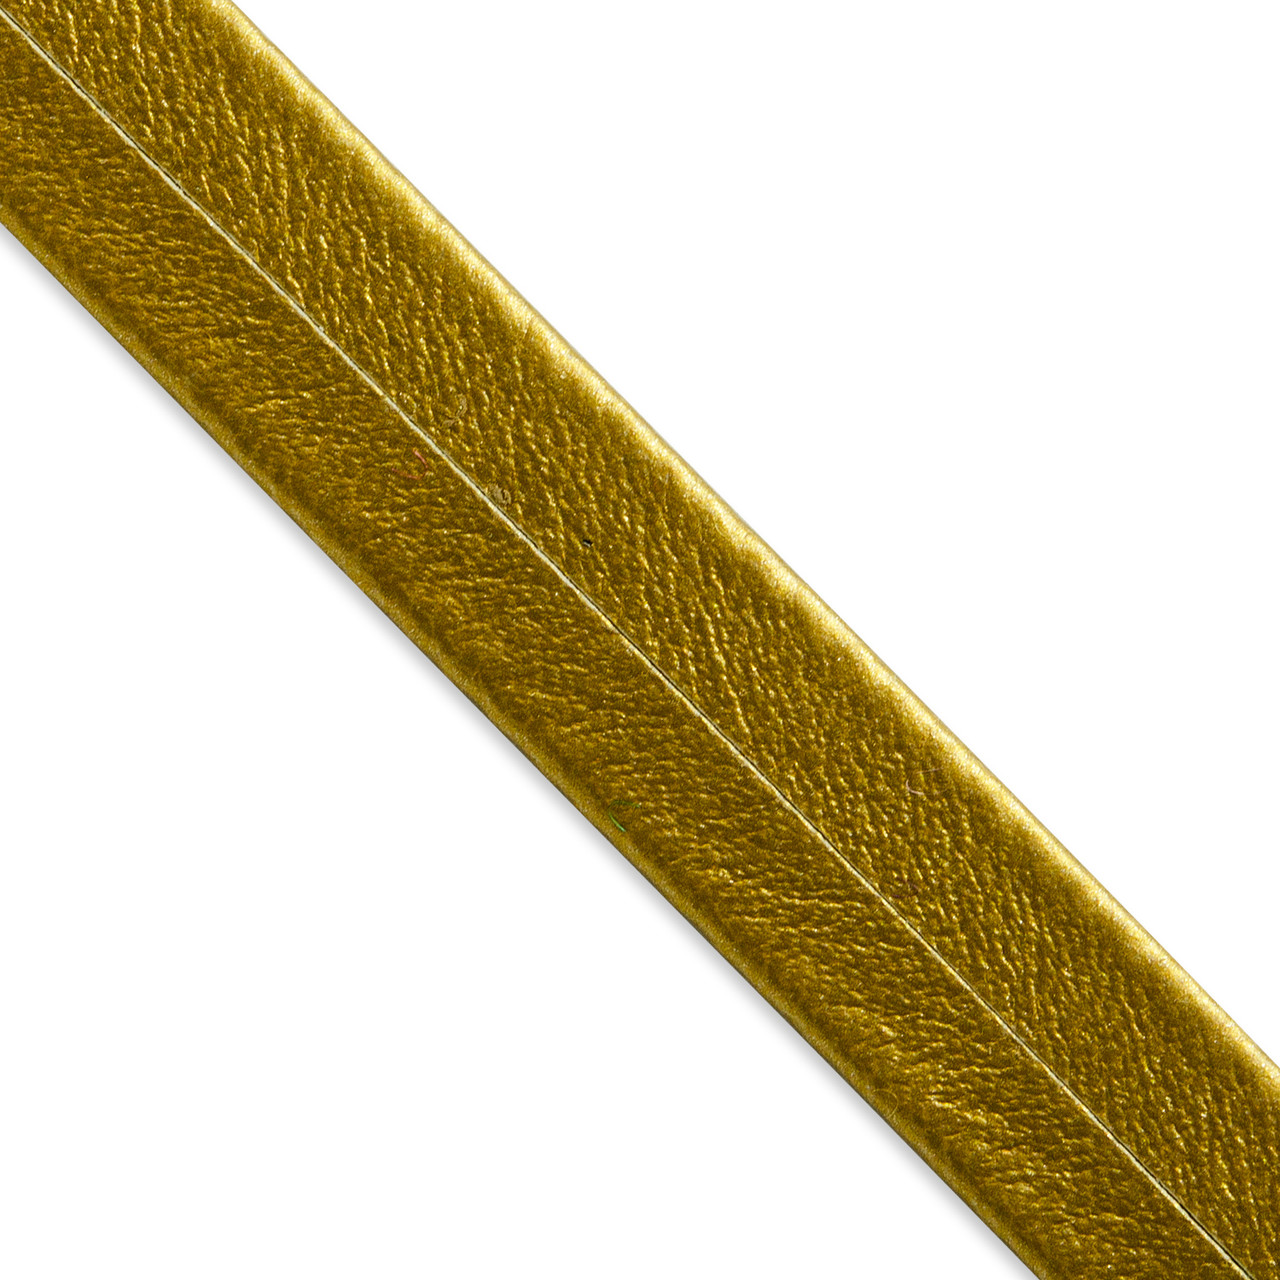 Expo Int'l Trucie Metallic Leather Look Trim by The Yard, Gold